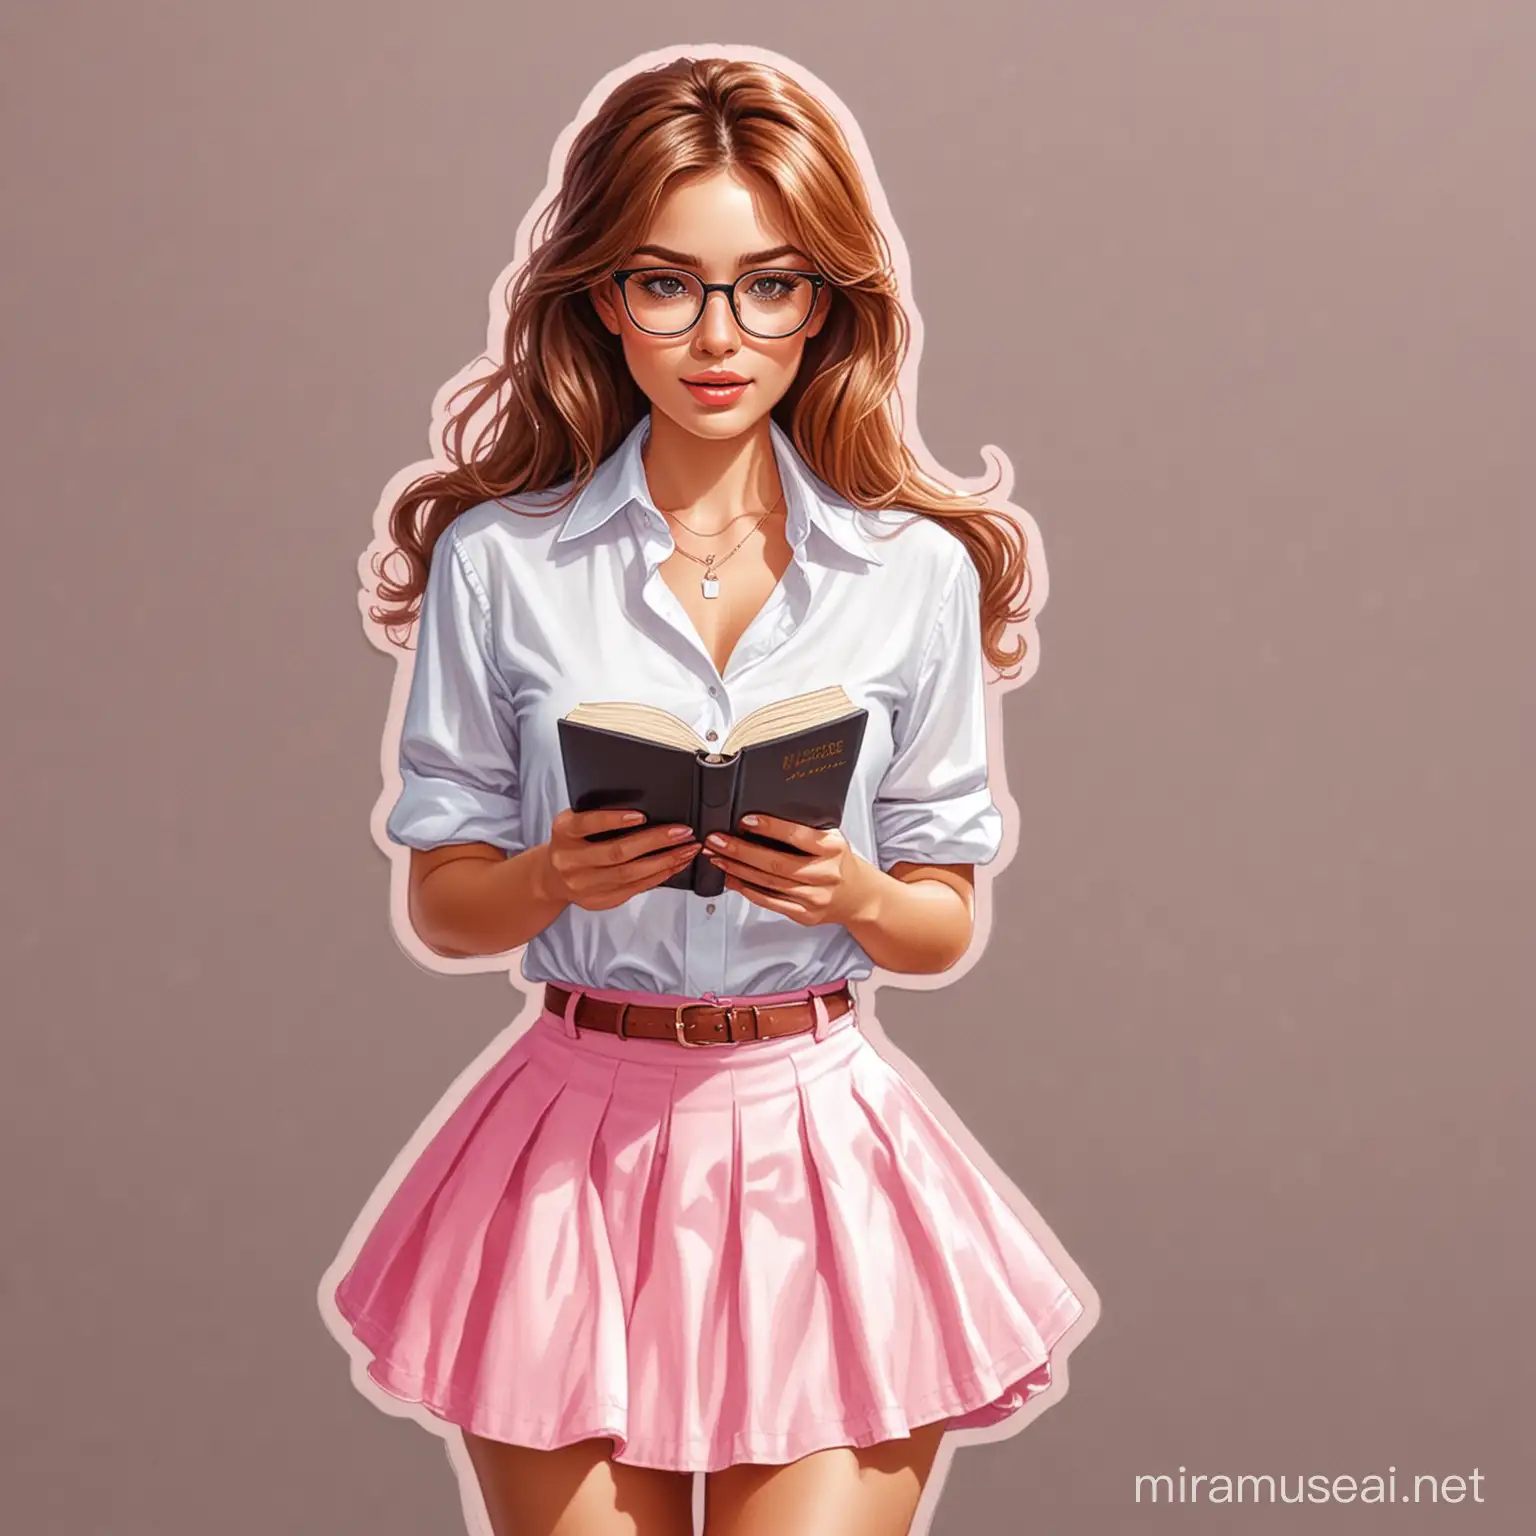 Sexy Girl Reading Book in Pink Skirt and White Shirt with Glasses and Necklace